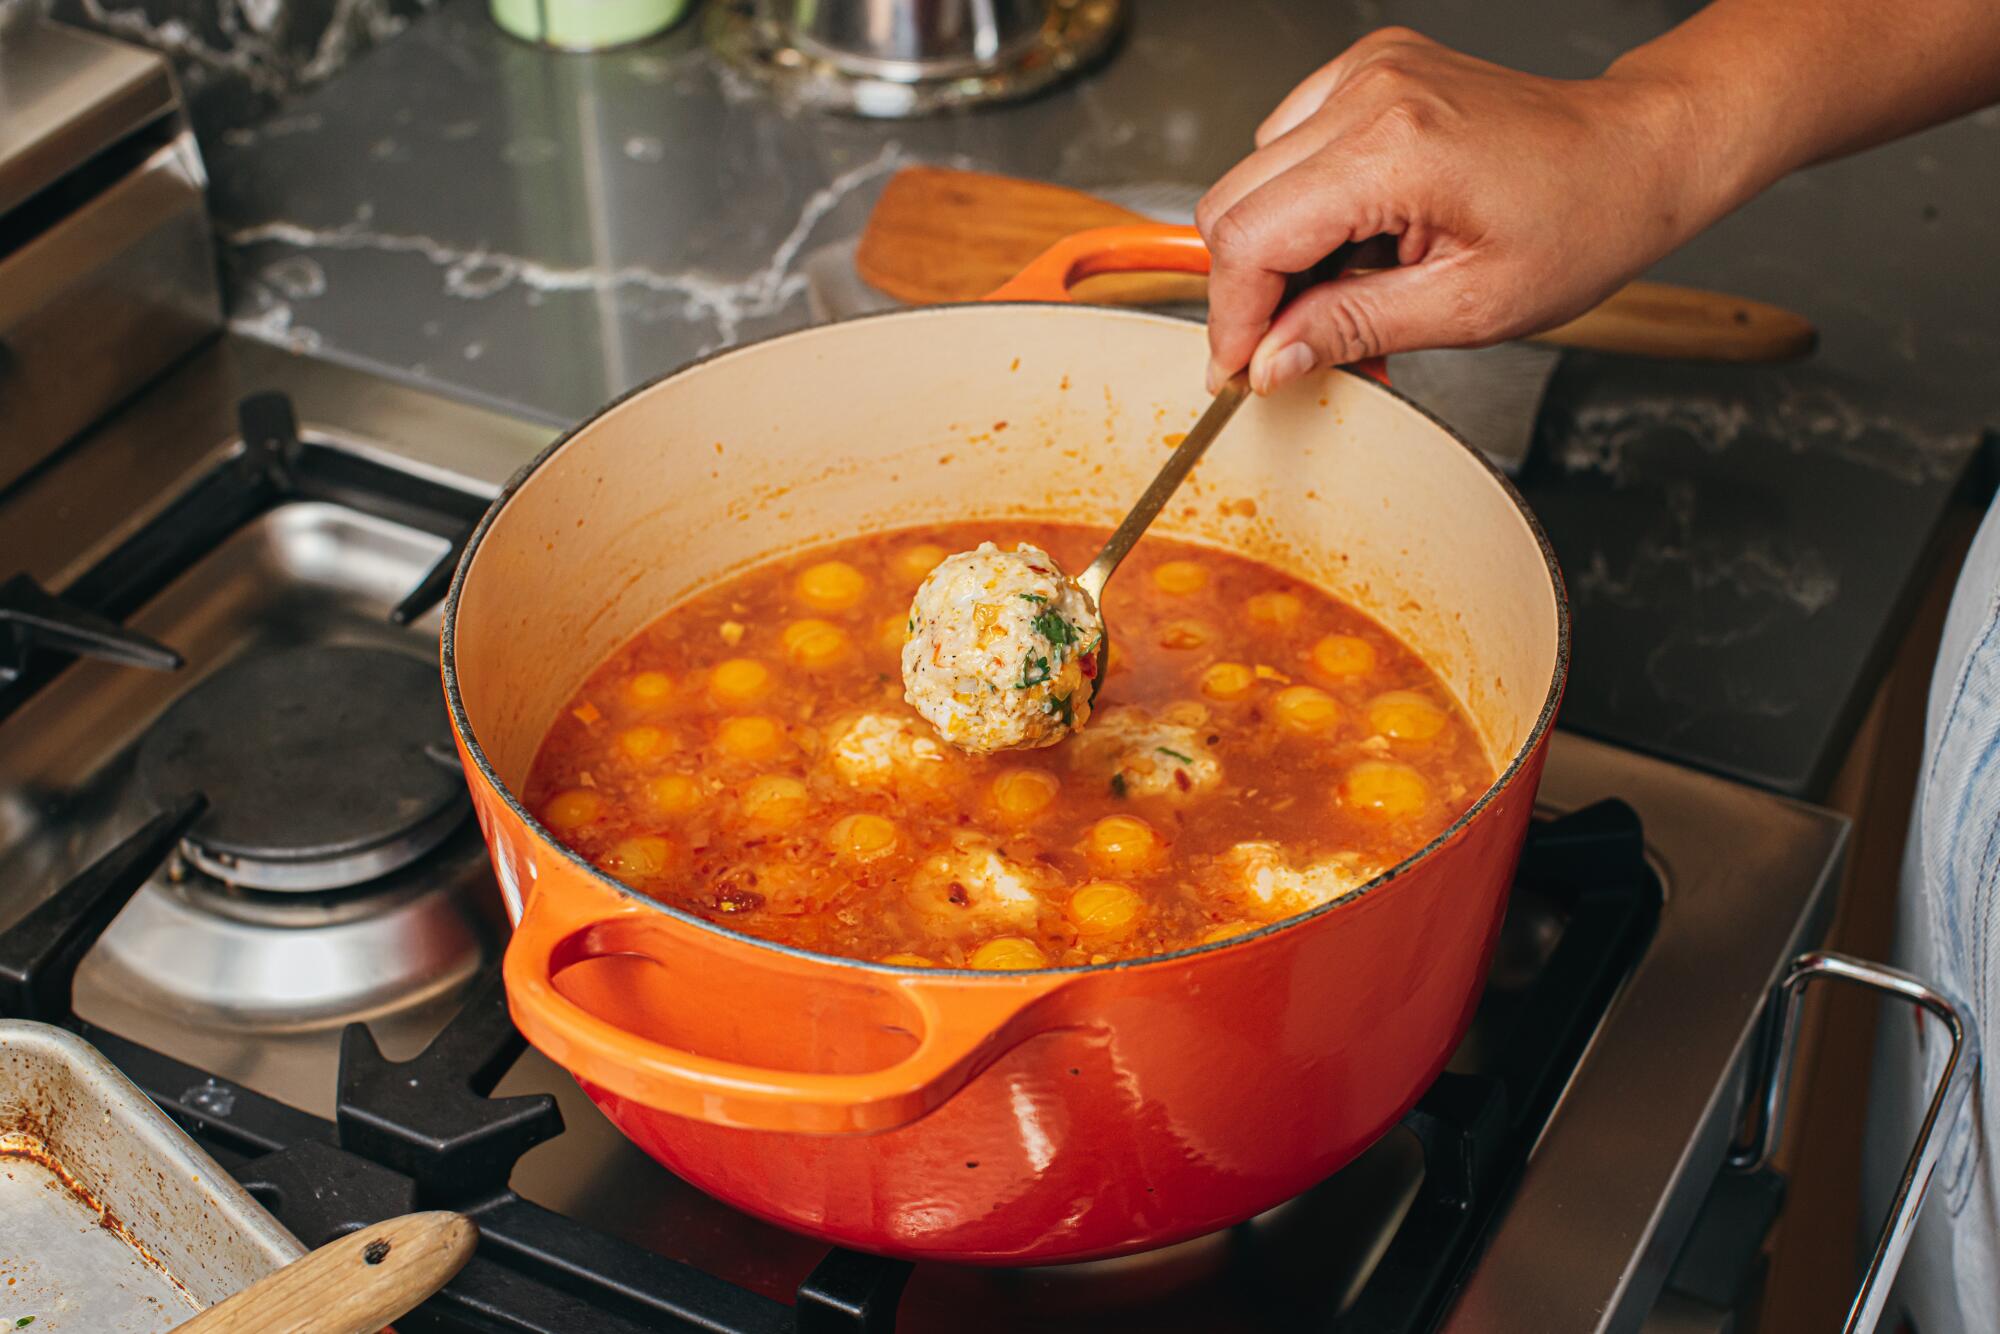 A hand uses a spoon to lift a meatball out of an orange pot filled with tomato-y broth